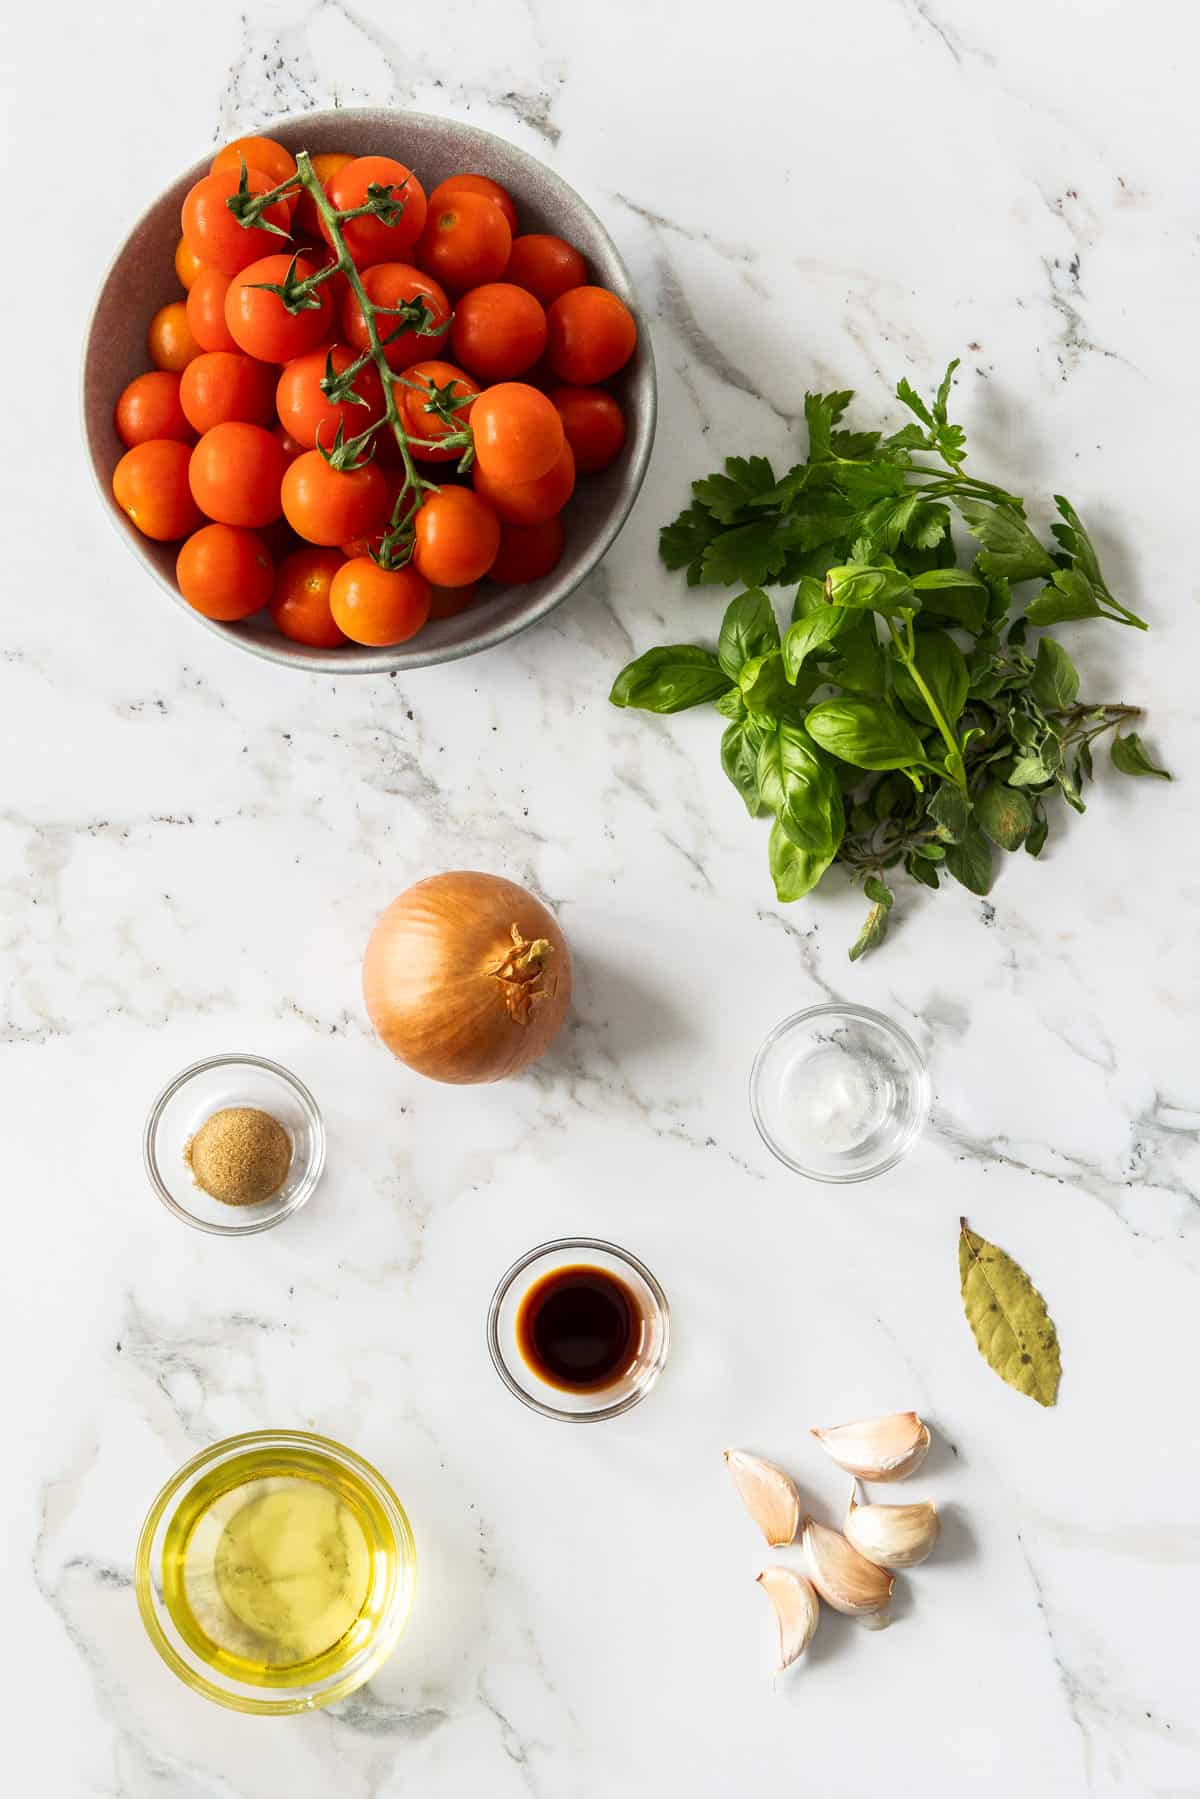 a bowl of cherry tomatoes, fresh herbs, garlic, onion, and other ingredients on a marble board.